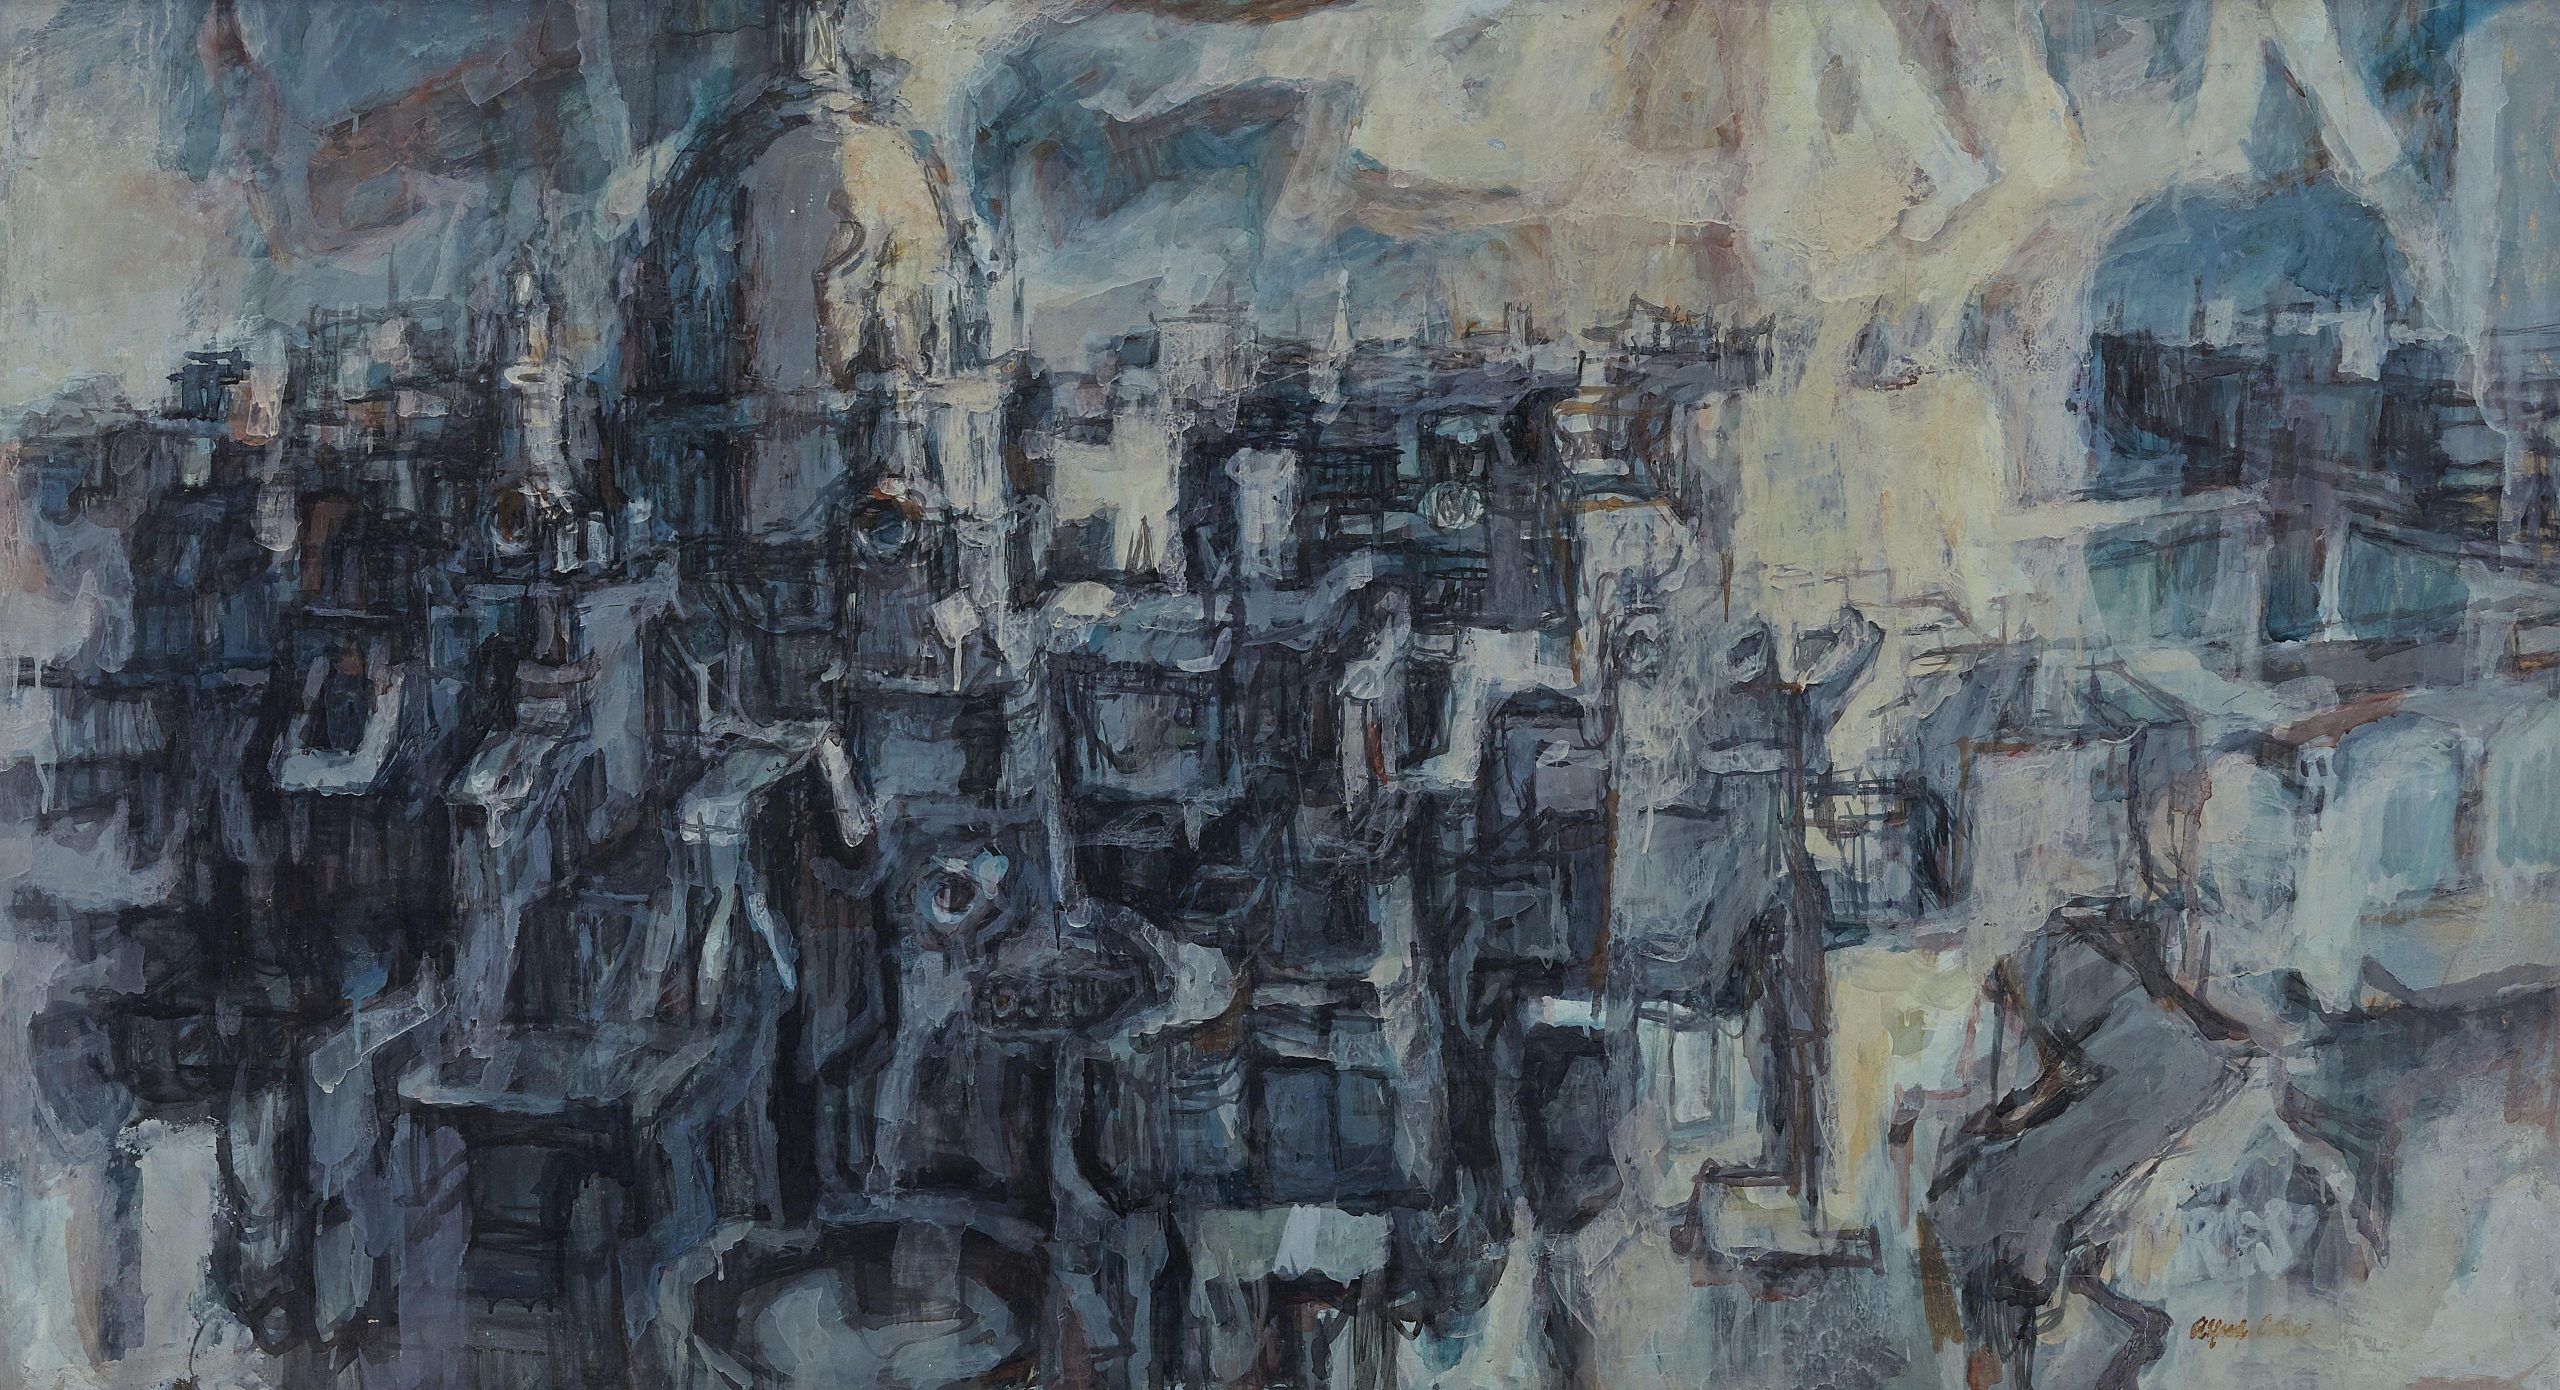 Grey/ blue painting of a London landscape with St Paul's Cathedral